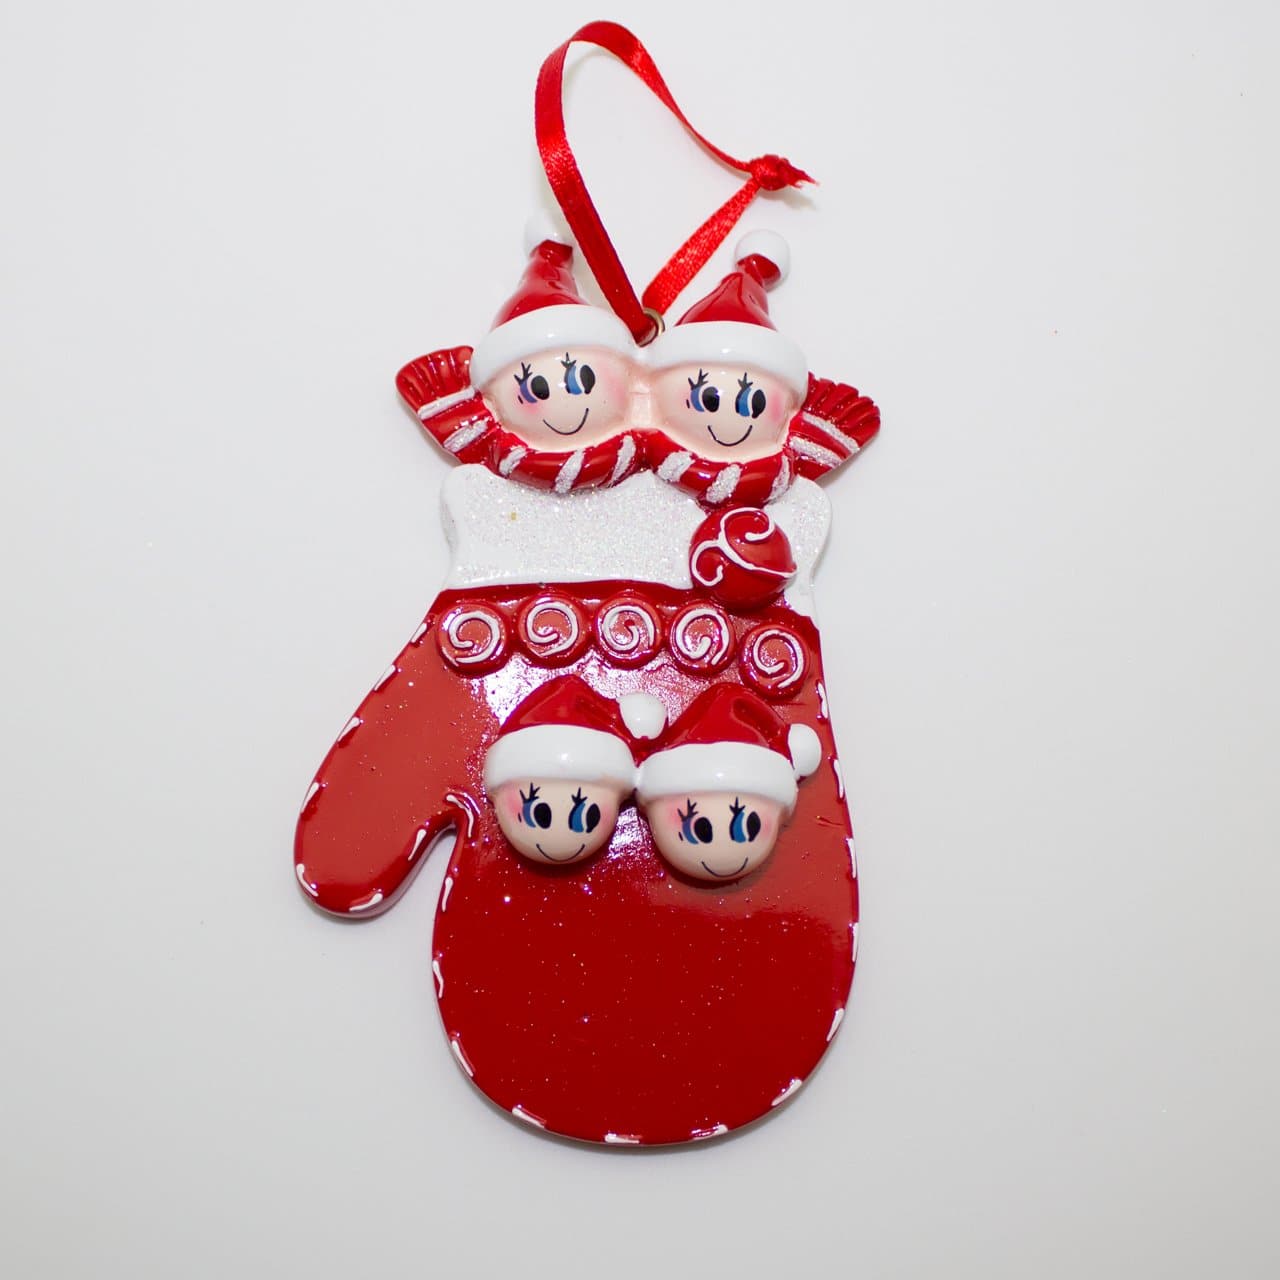 Glove - Christmas Ornament (Suitable for Personalization)